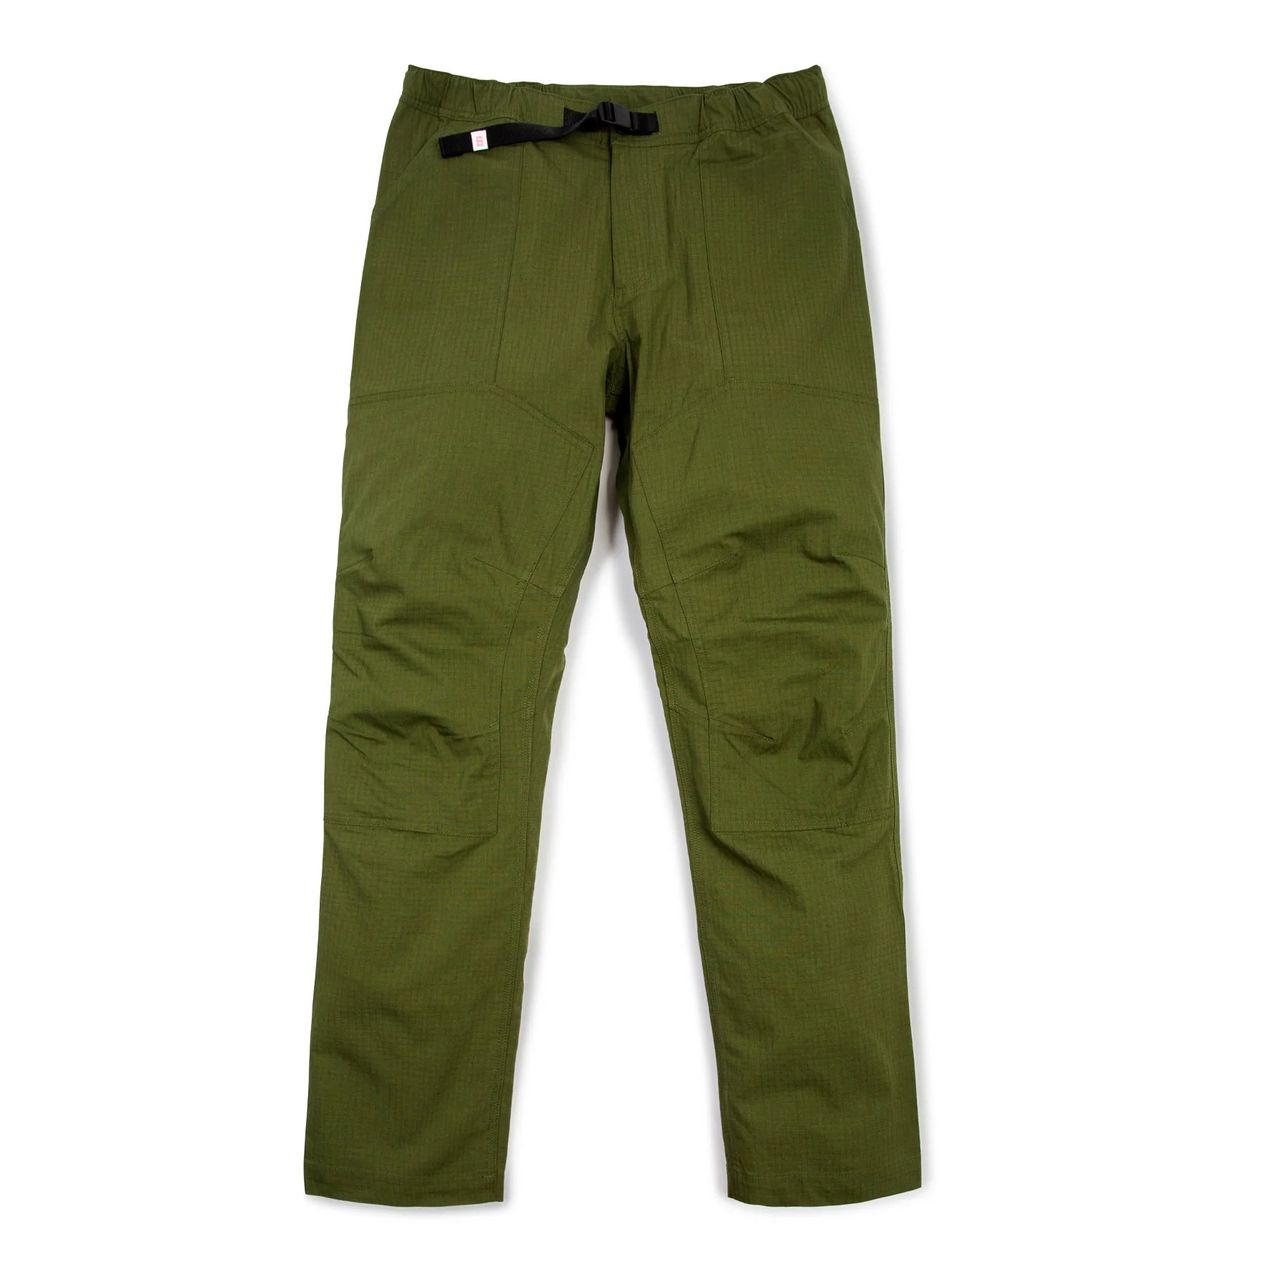 https://cdn11.bigcommerce.com/s-45mun2obzo/images/stencil/original/products/15450/84209/Mountain_Pant_Olive_RSZ__25558.1678315937.jpg?c=1